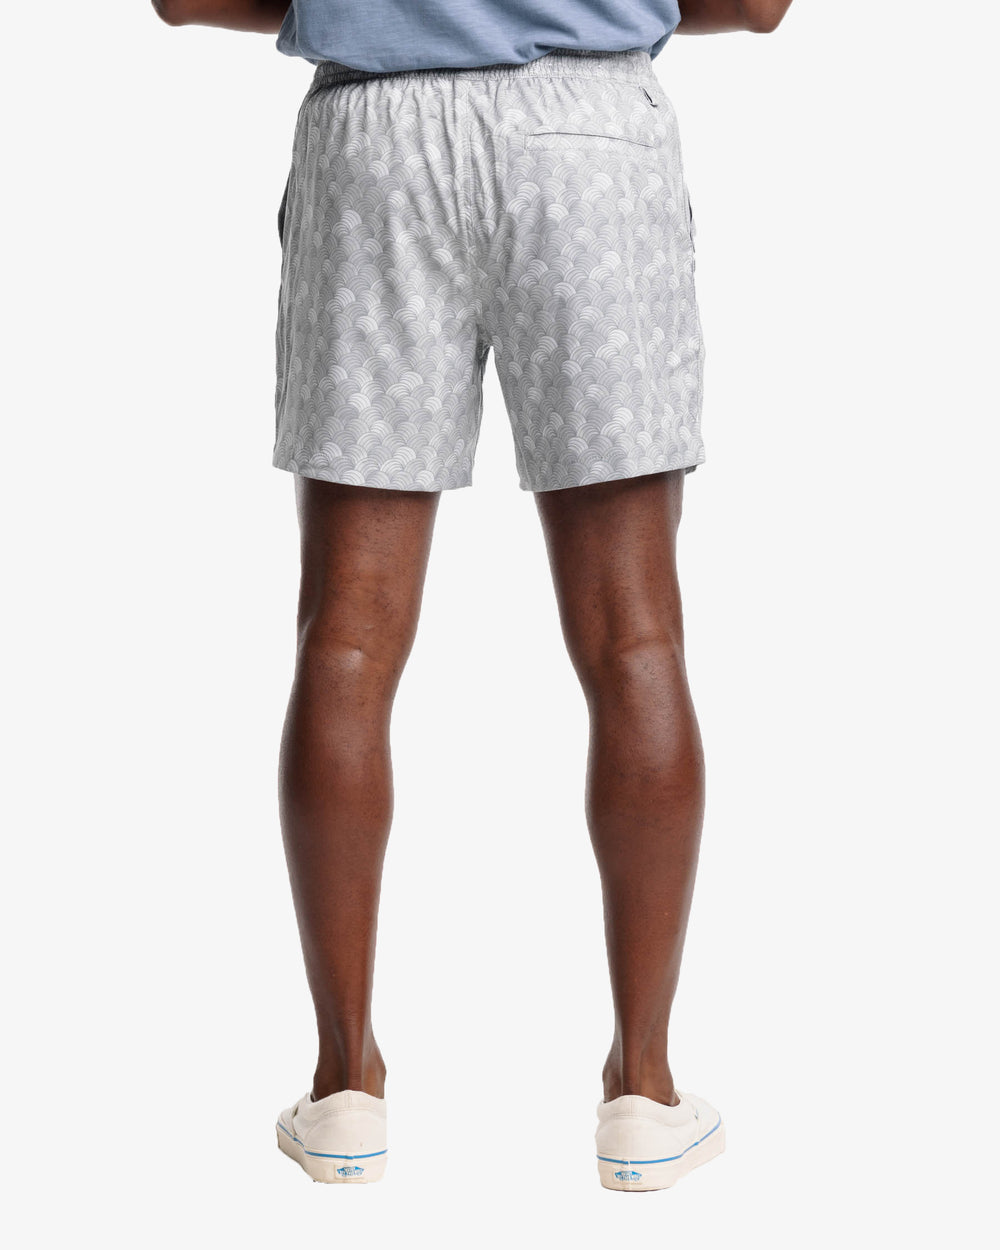 The back view of the Southern Tide Rip Channel Monterrey Short by Southern Tide - Steel Grey